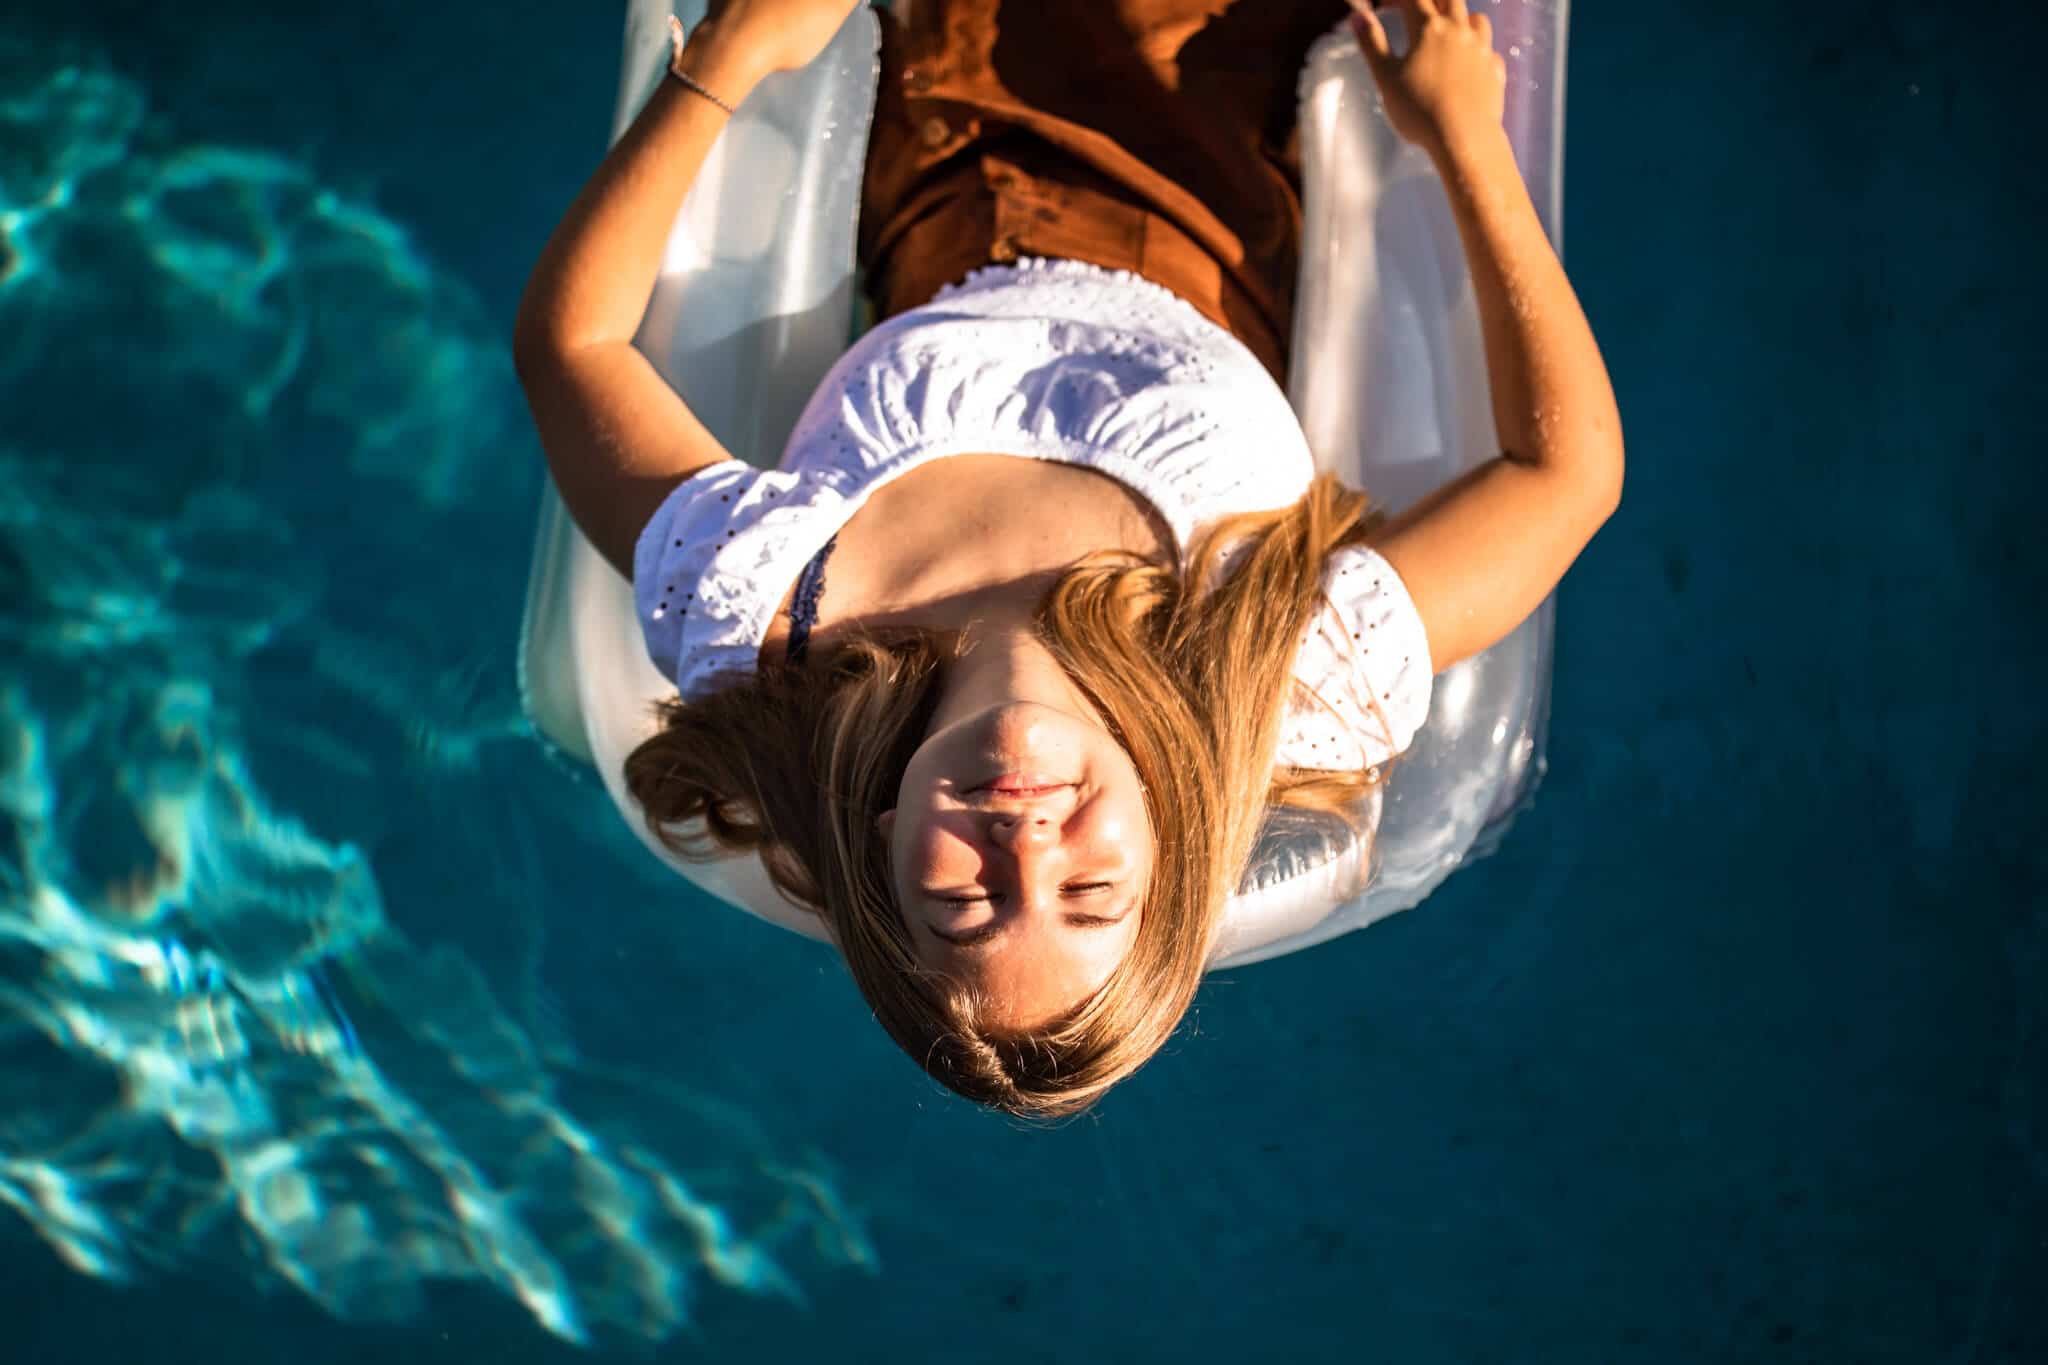 senior girl floats on raft in pool, angle is from above